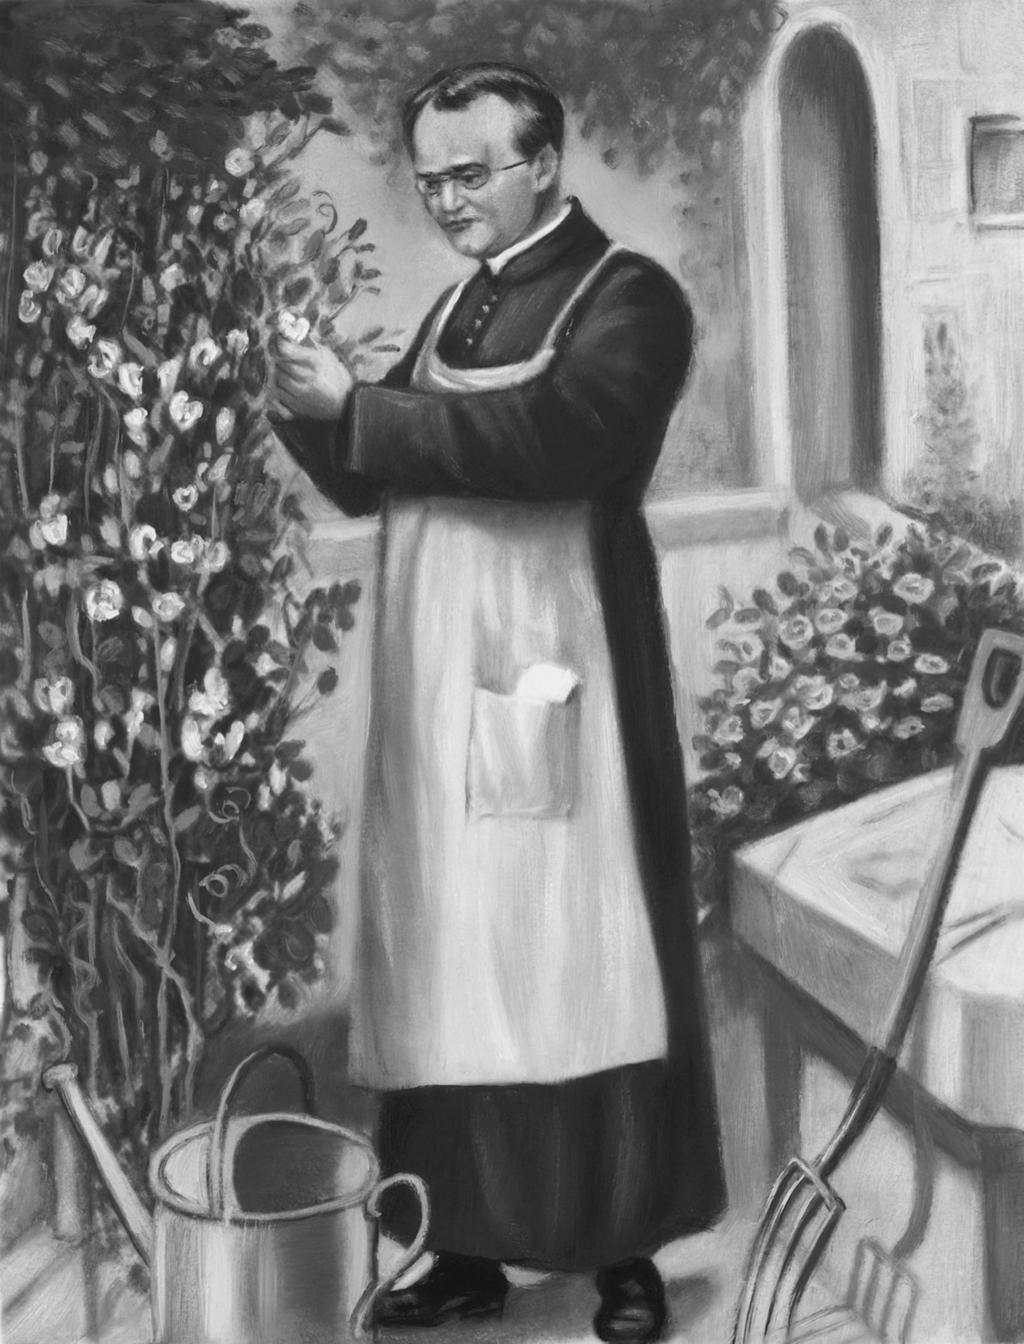 Introduction to evolutionary psychology 7 Figure 1.2 Gregor Mendel Between 1858 and 1875 Mendel conducted a series of breeding experiments on hybrid pea plants in the garden of his monastery in Brunn.